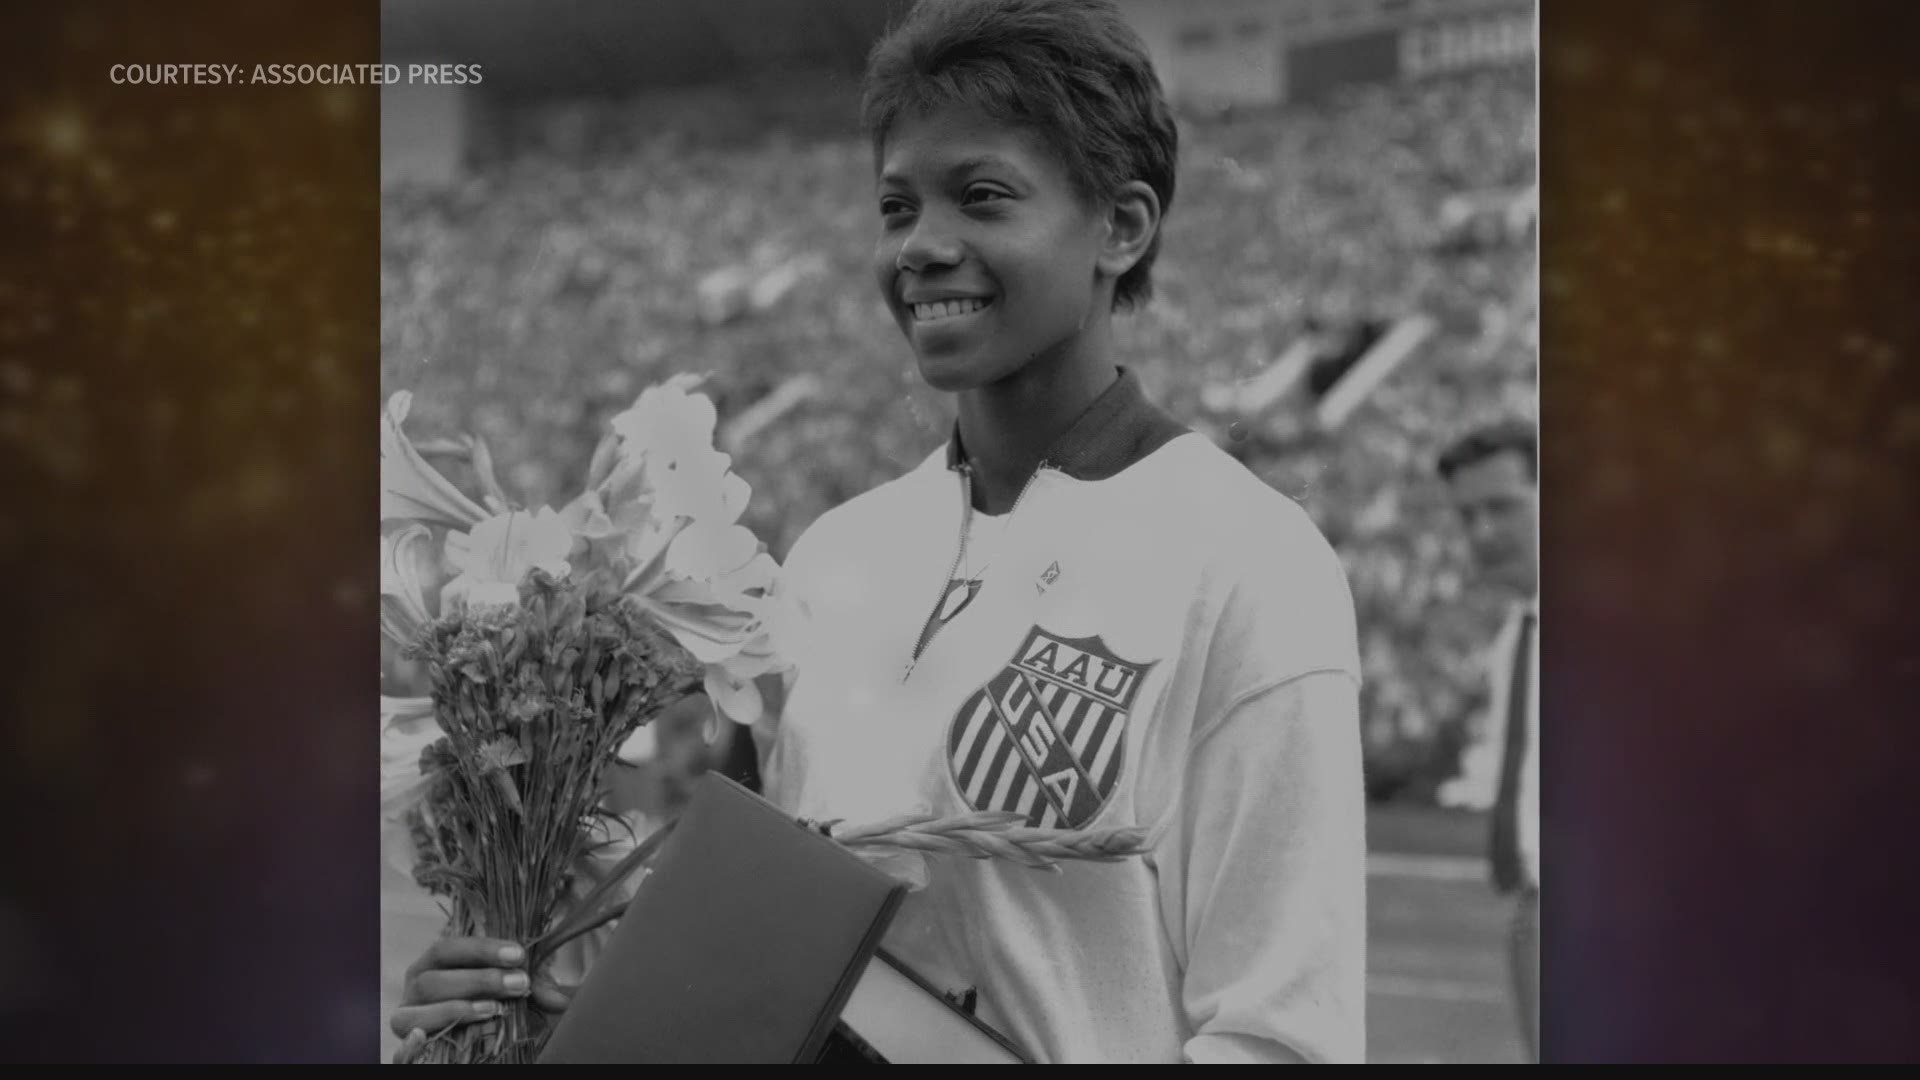 As we get close to the Olympics, we're taking a look at those who have broken down barriers in the world of sports. Wilma Rudolph certainly did that in track & field